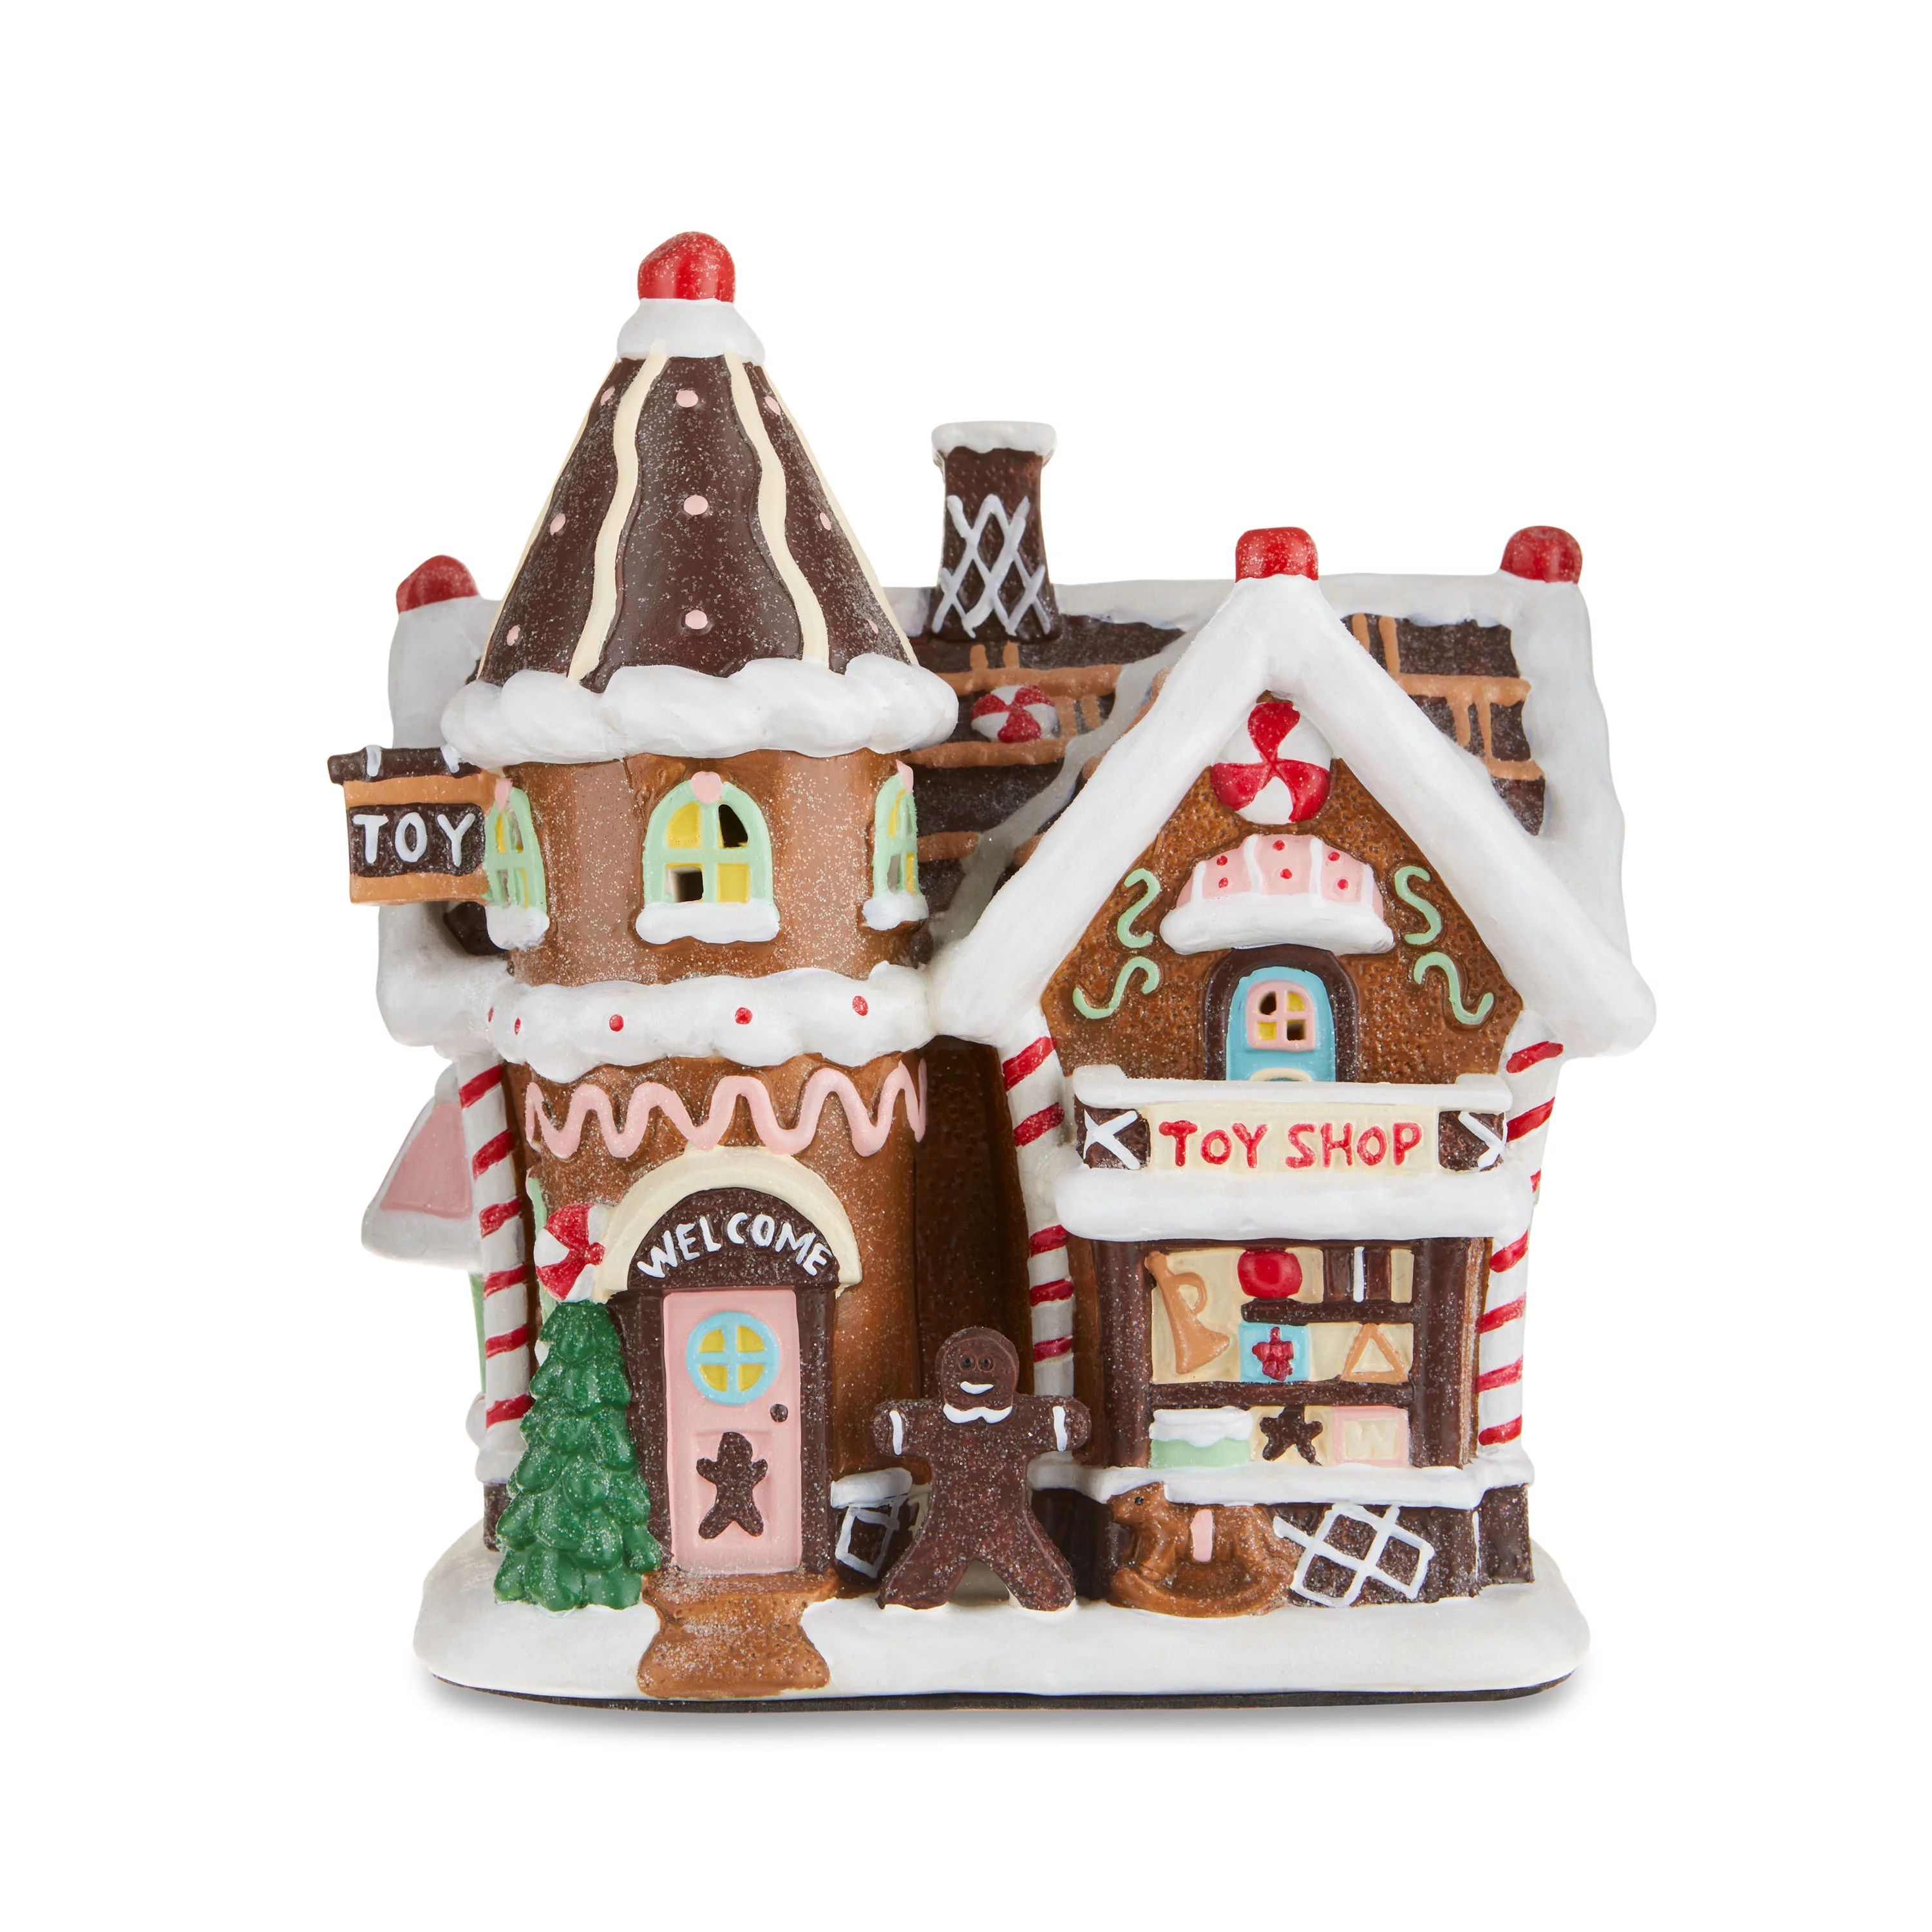 Christmas Village Light-up Gingerbread Toy Shop, Multi-color,10", 3.74lb, by Holiday Time | Walmart (US)